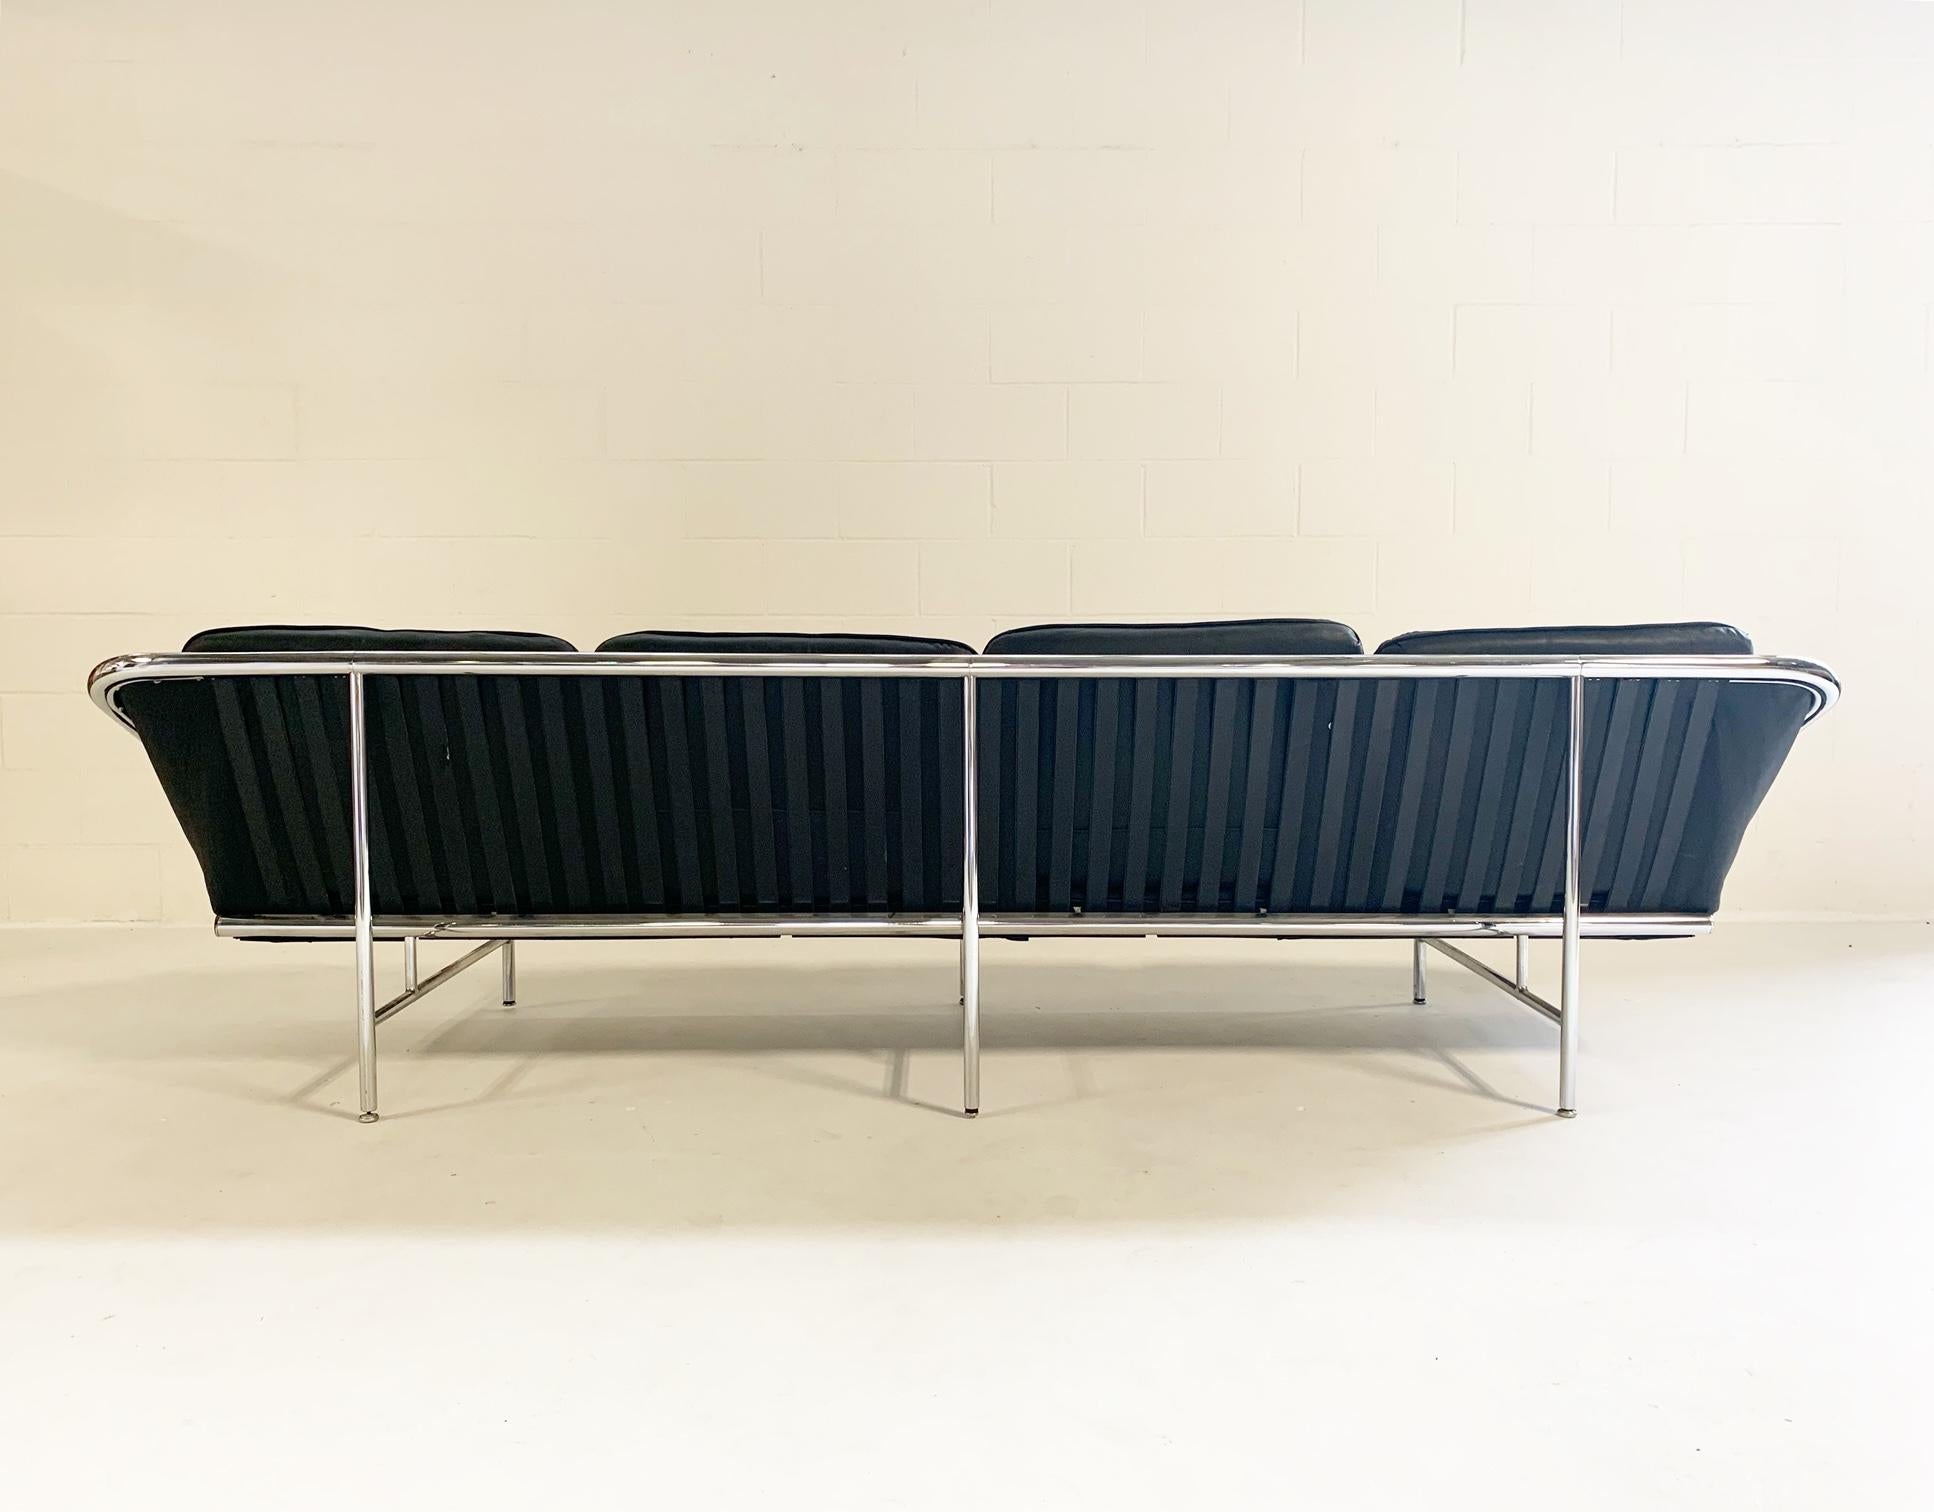 An exceptional piece of midcentury design. We fell in love with the exquisite lines of this model 6833 leather sling sofa by George Nelson for Herman Miller. Leather is in great condition. Ready for every day use.

Measures: Width 112 in, depth 33